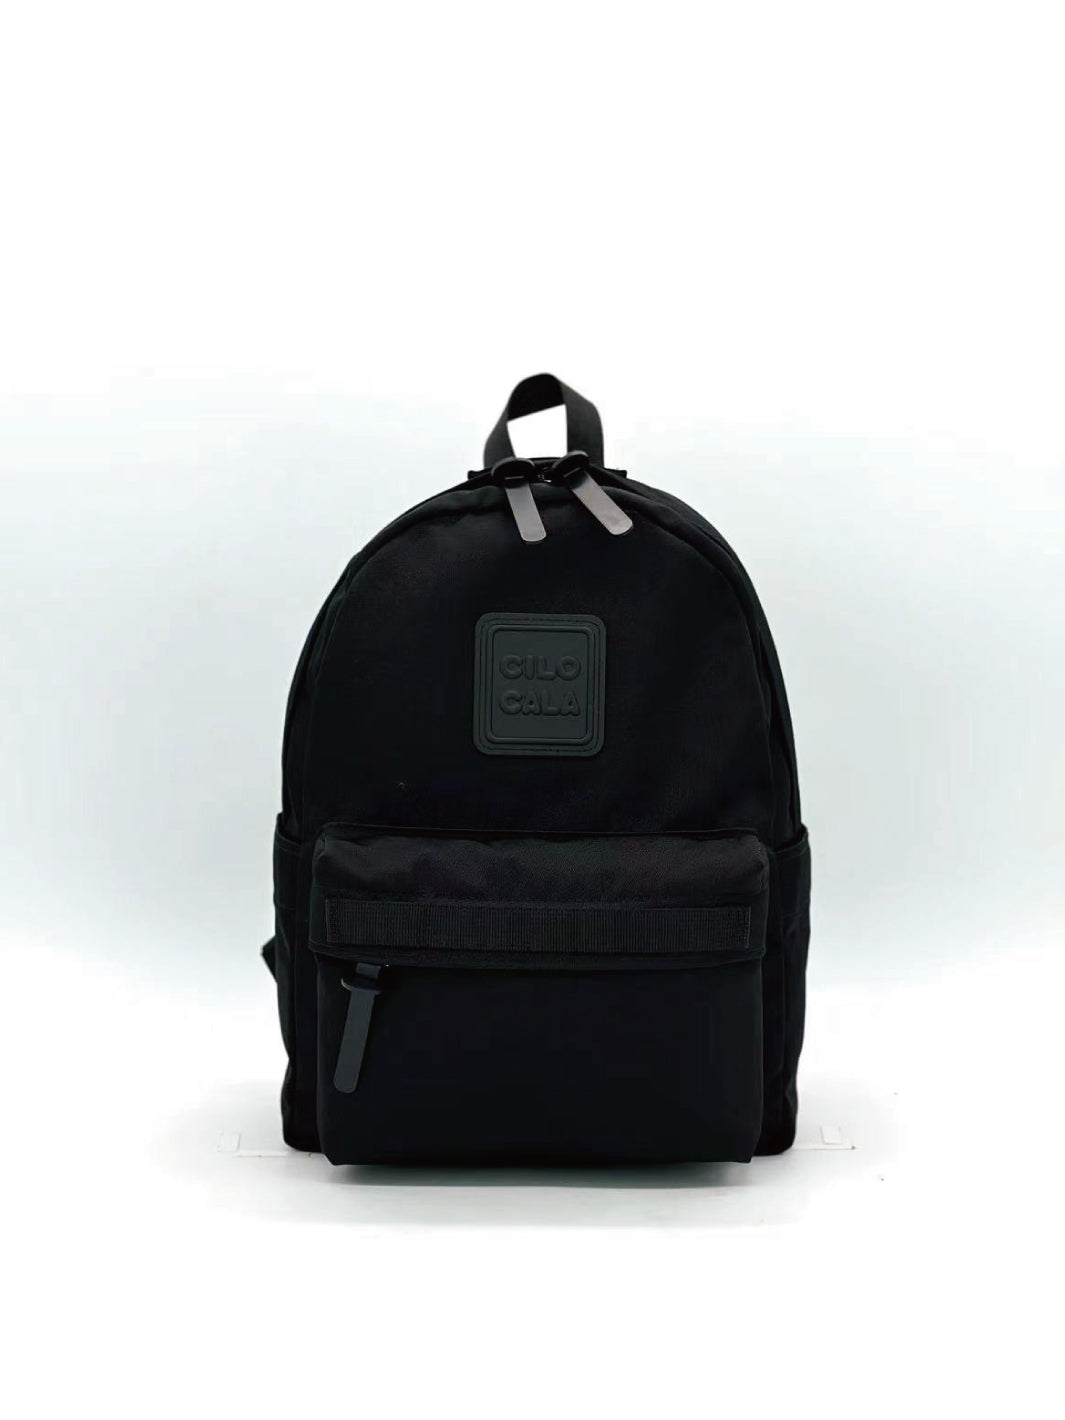 BLACKY BACKPACK (SMALL)